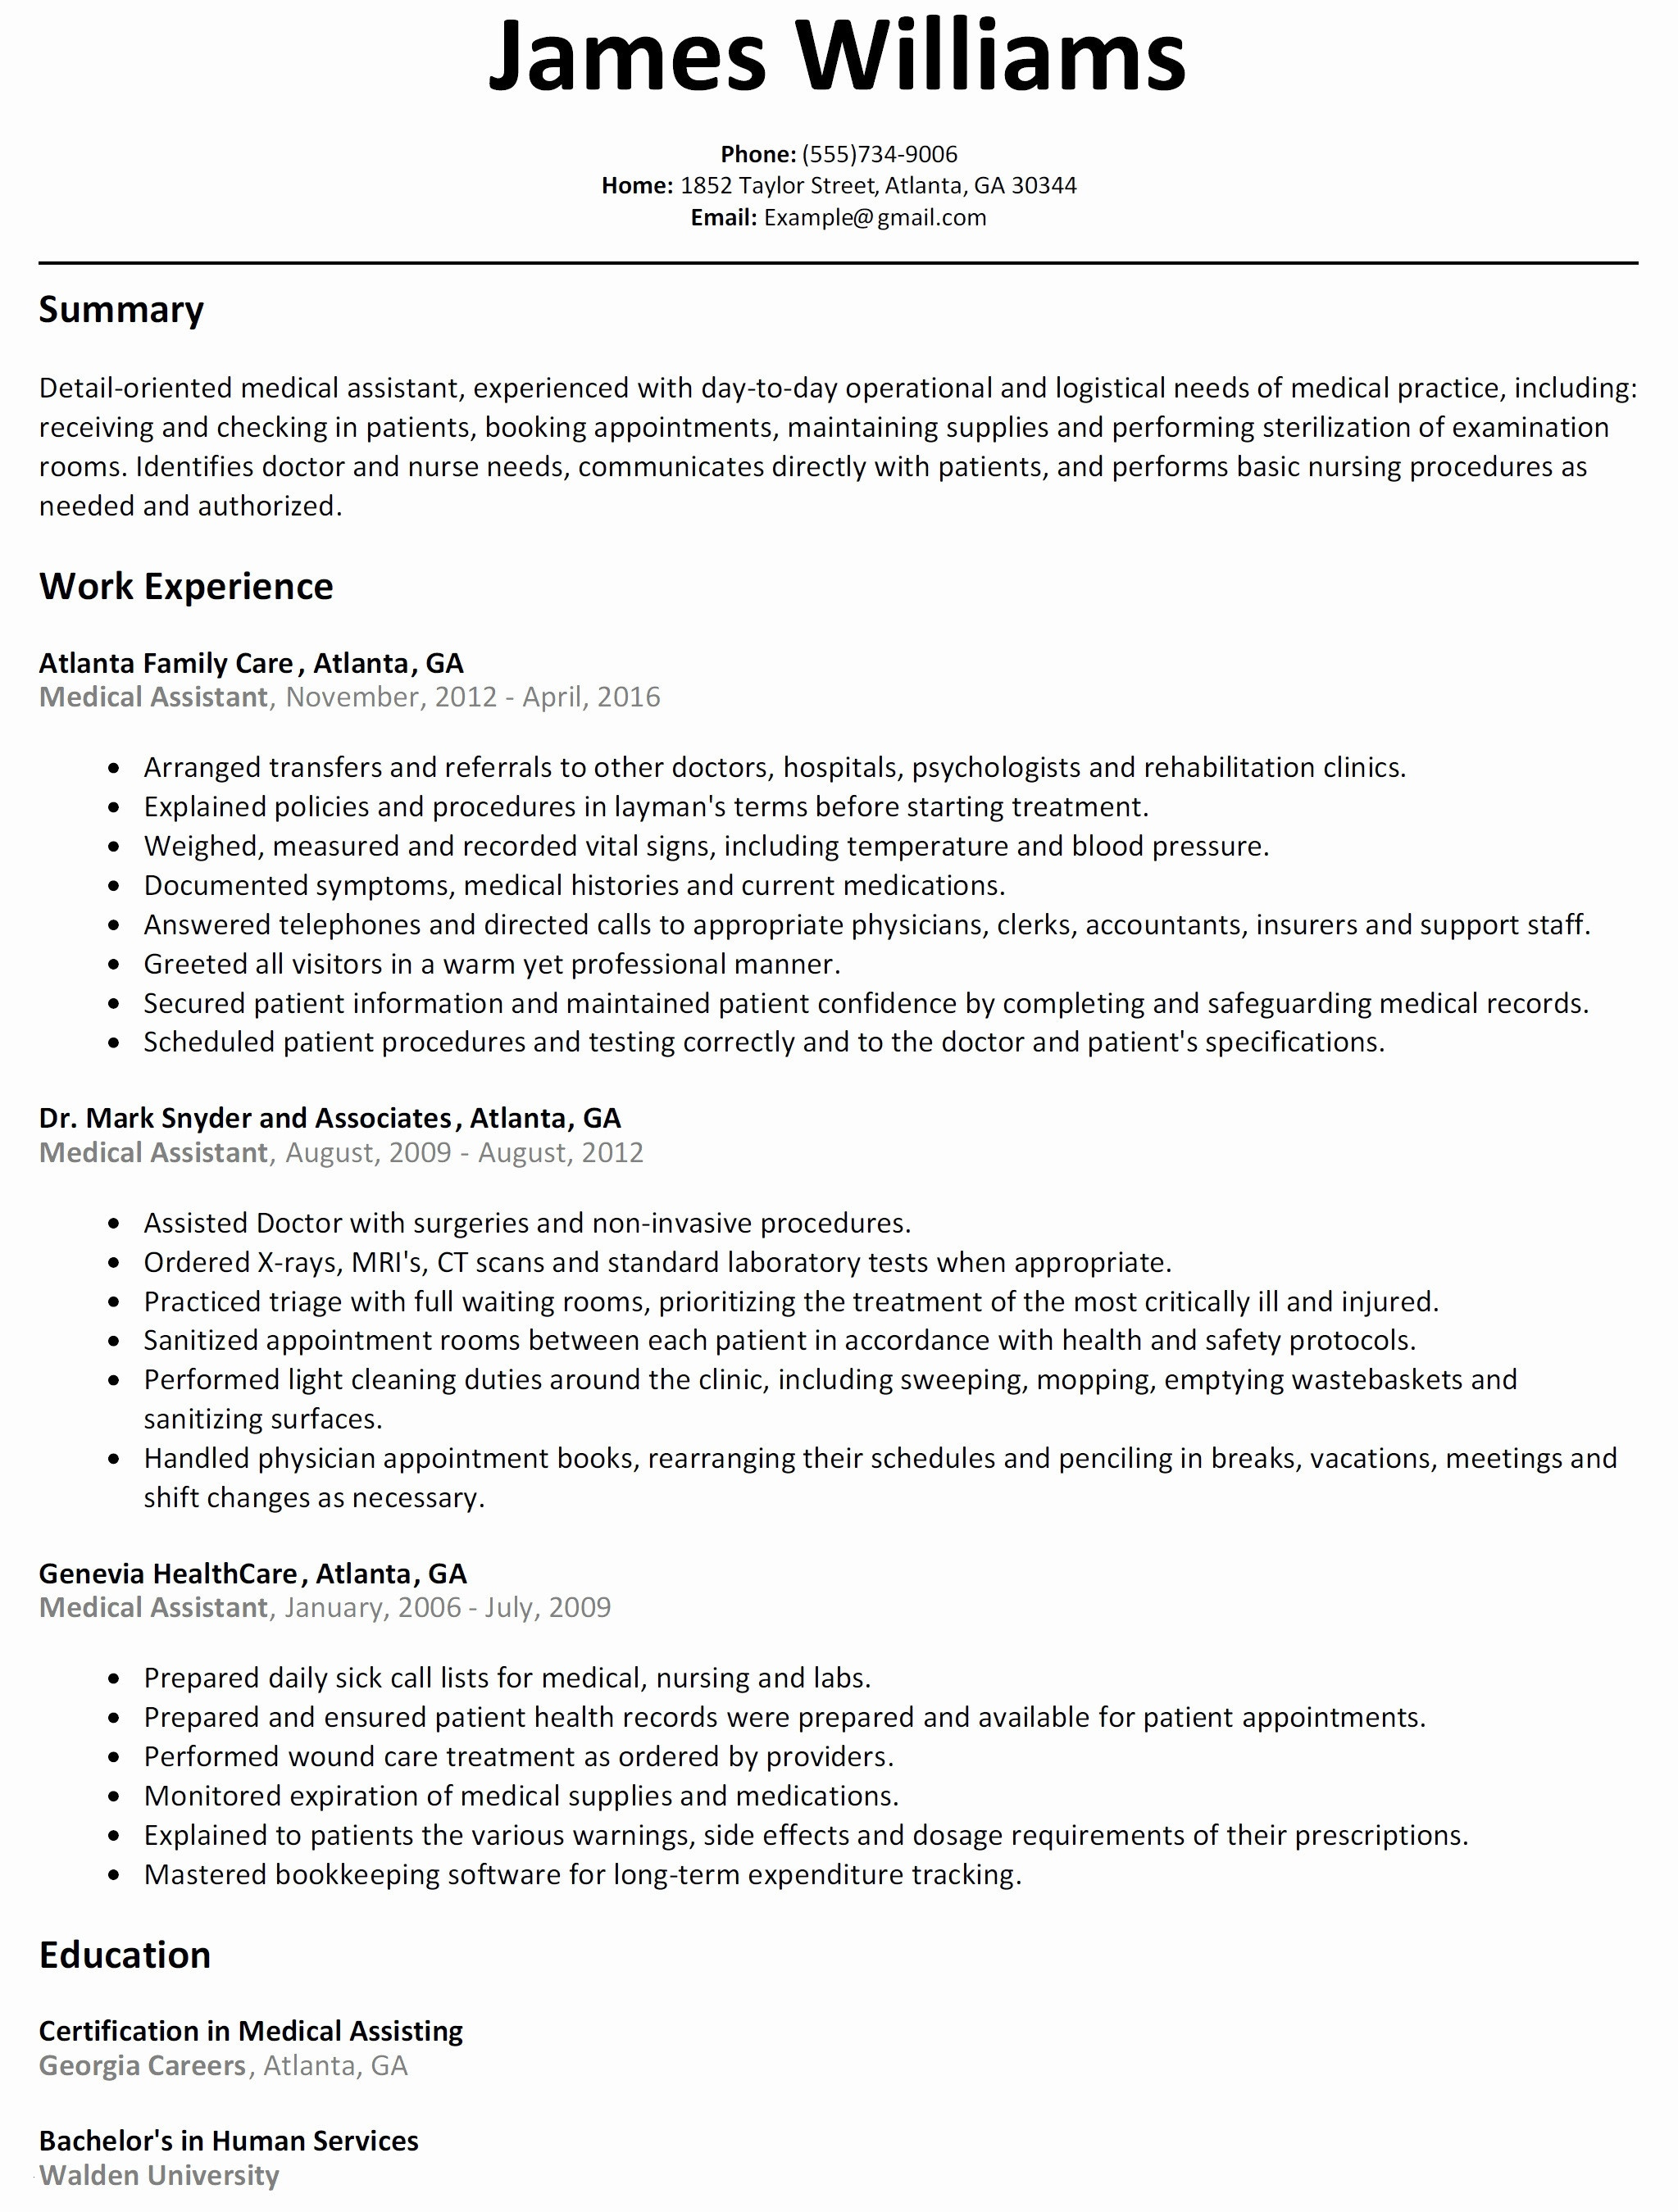 Free Letter Template Word - Educational Resume Template Legalsocialmobilitypartnership